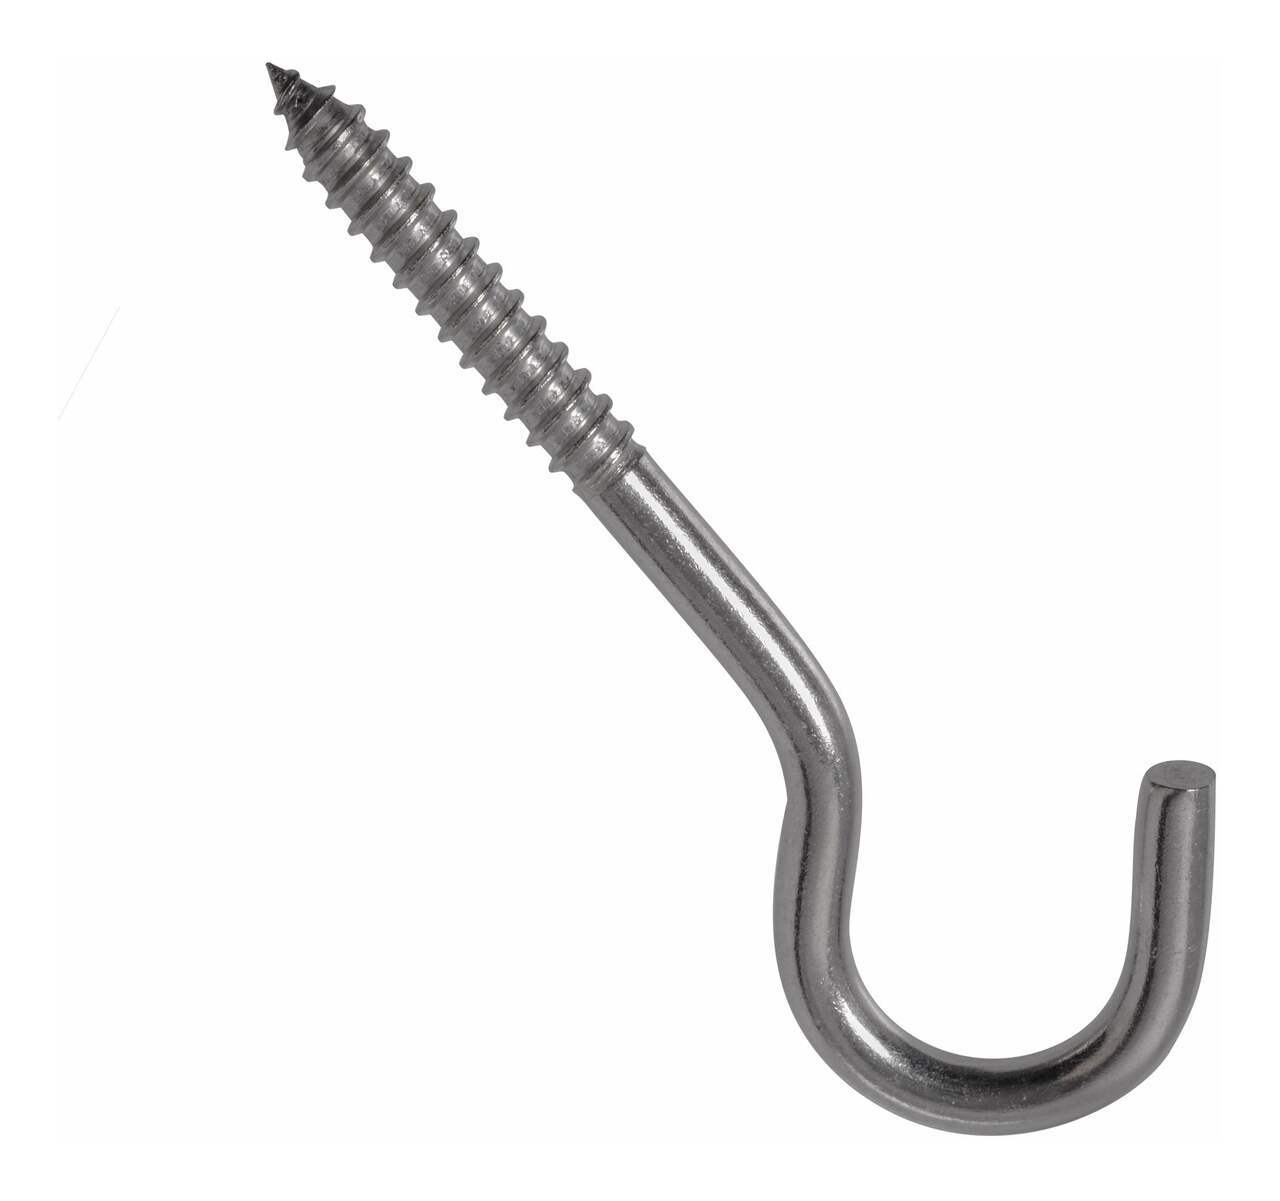 https://media-www.canadiantire.ca/product/fixing/hardware/general-hardware/0612000/3-8-x-4-8-lag-screw-hook-stainless-steel-1pc-c28ec084-d7e9-4bb4-a641-b3c9838790bb-jpgrendition.jpg?imdensity=1&imwidth=640&impolicy=mZoom